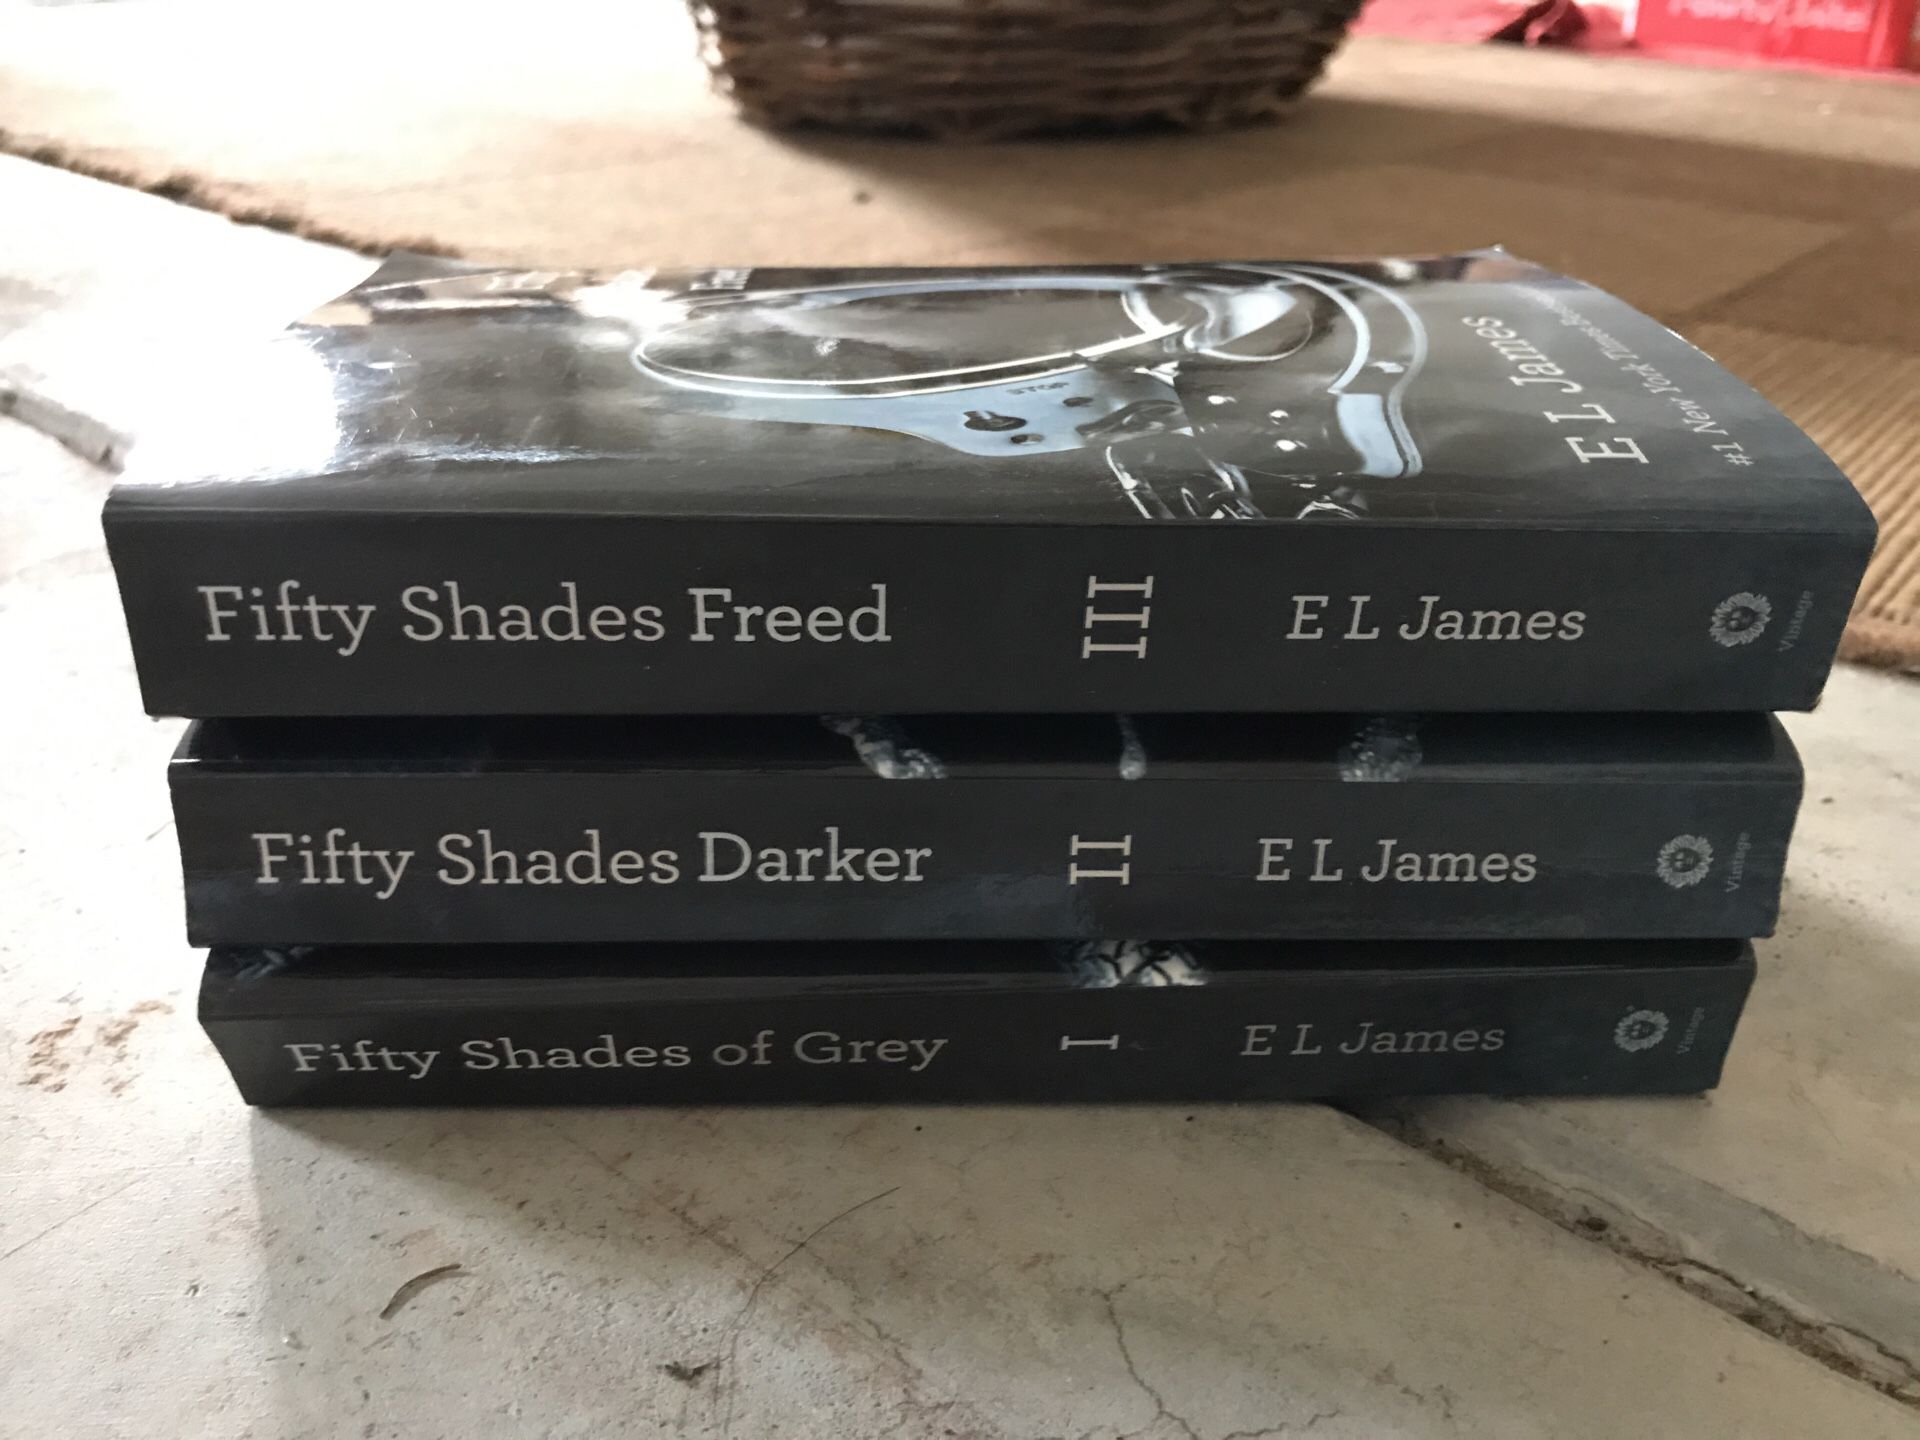 Fifty shades of Grey: 3 book series